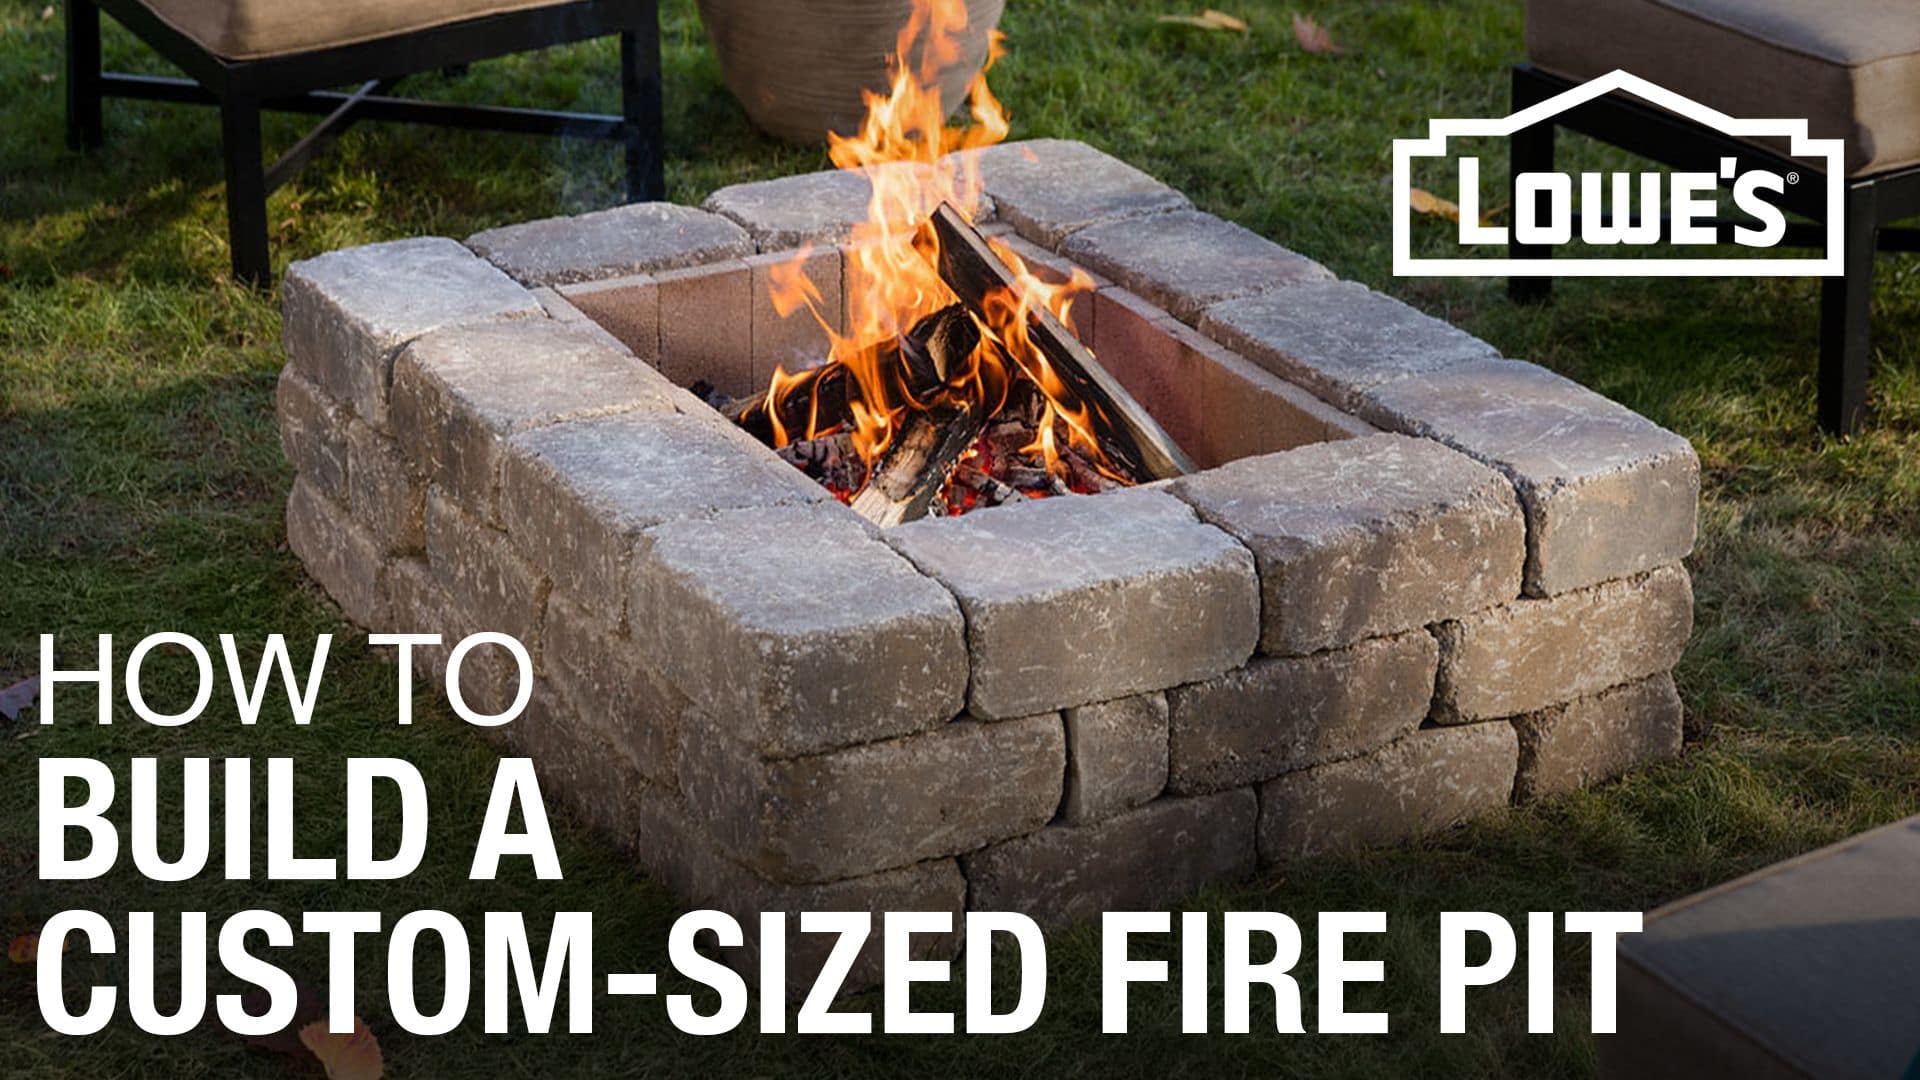 How To Build A Fire Pit | Lowe'S